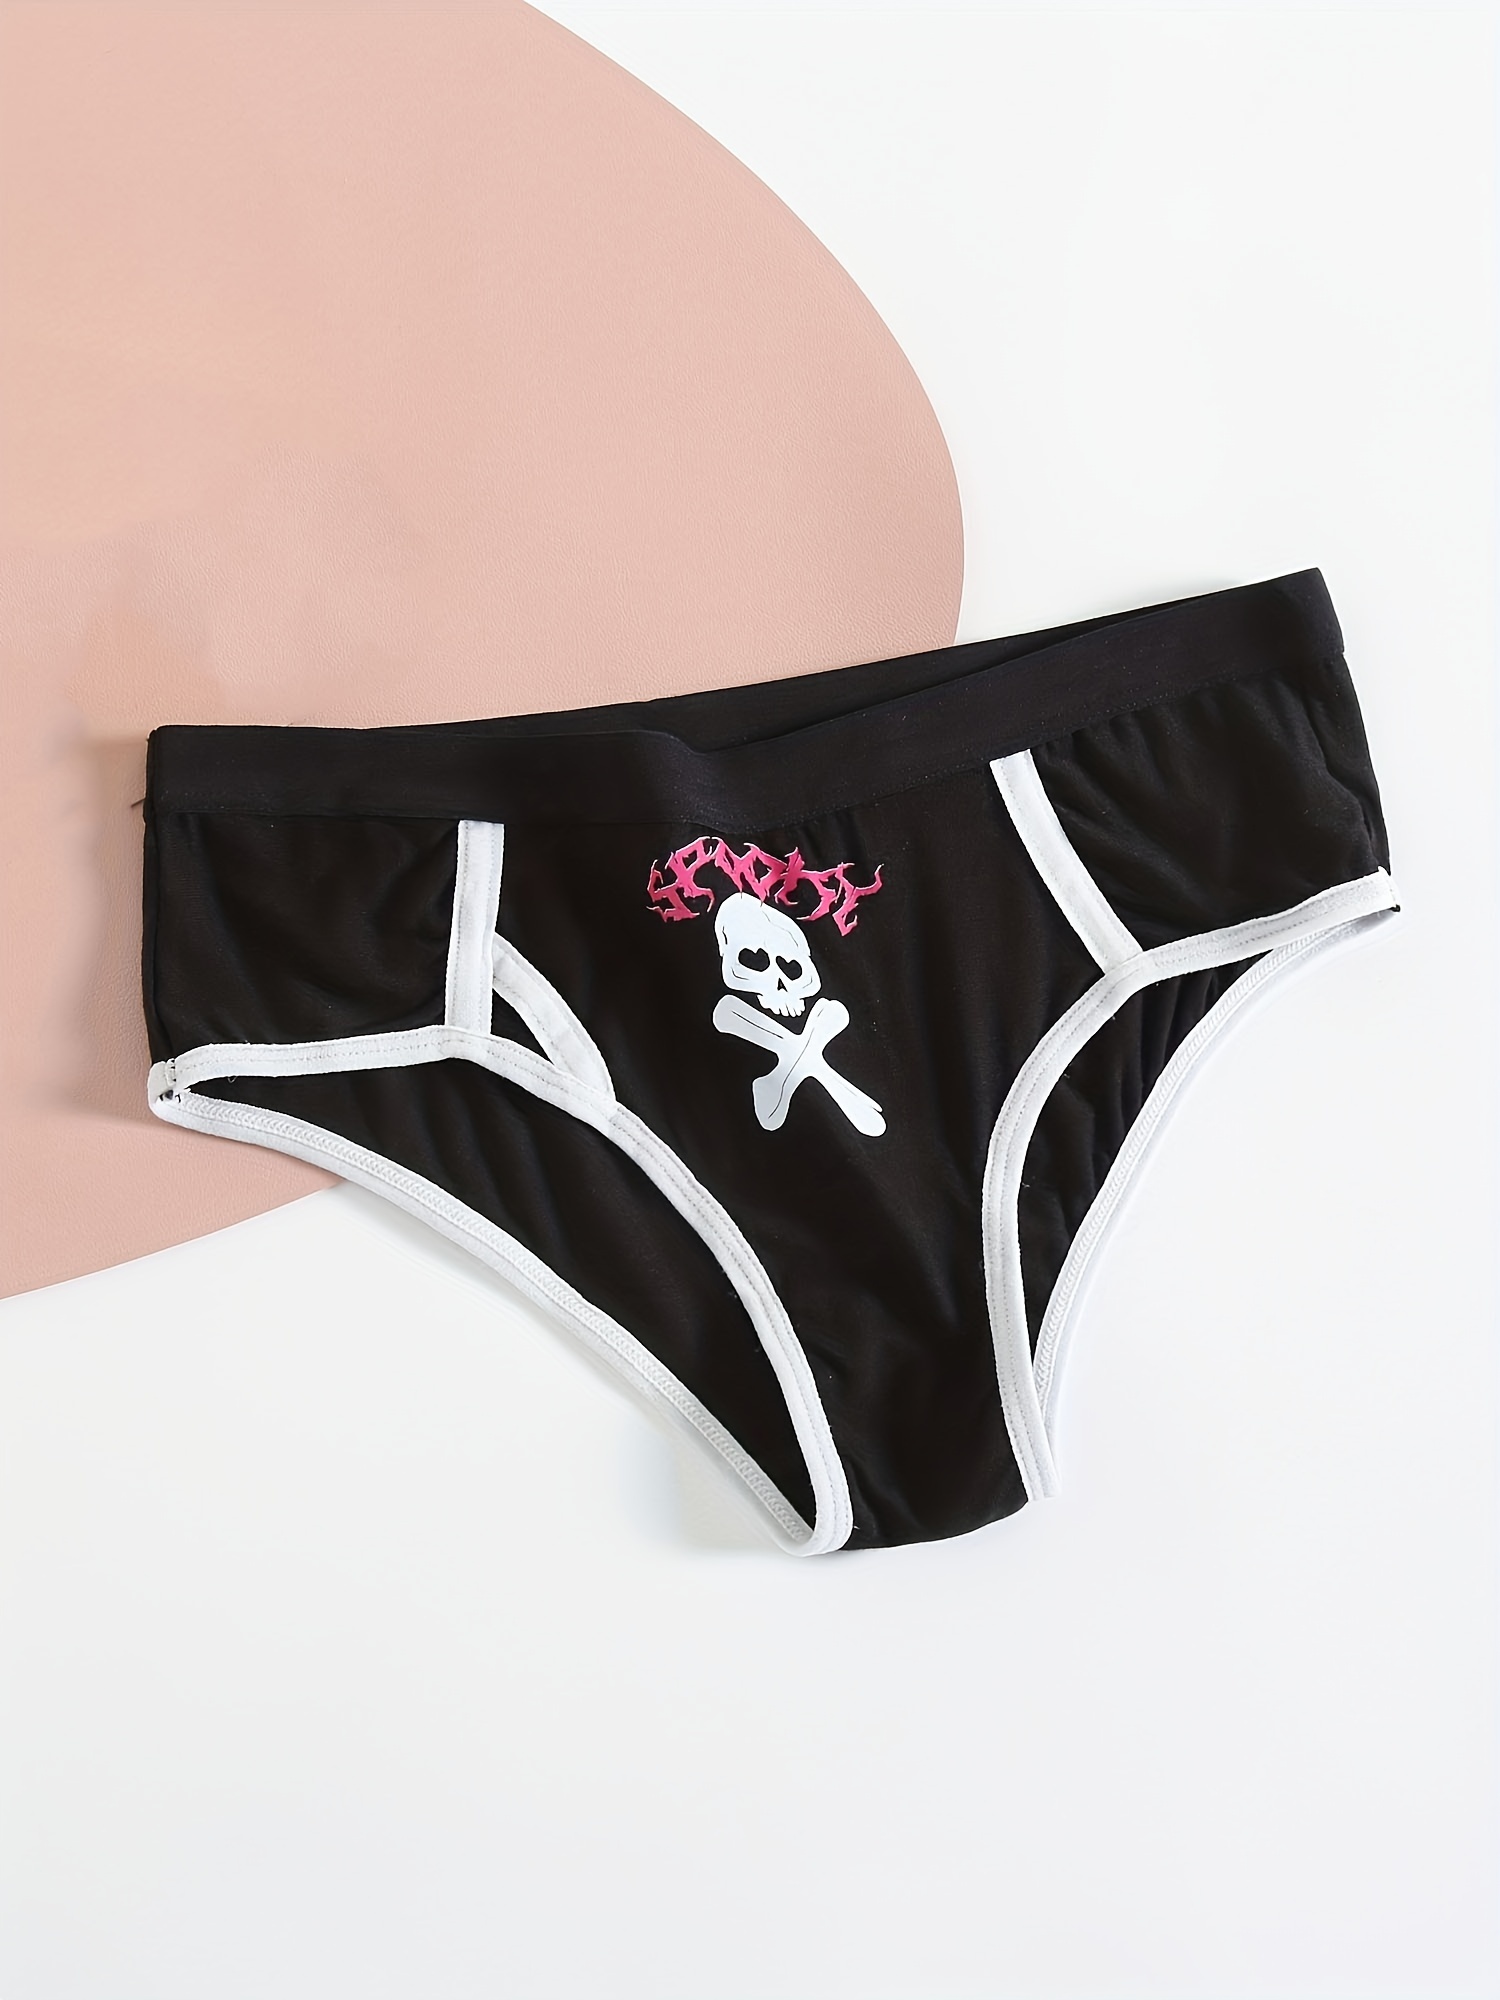 3pcs Punk Skull Pattern Briefs, Comfy & Funny Halloween Stretchy Intimates  Panties, Women's Lingerie & Underwear